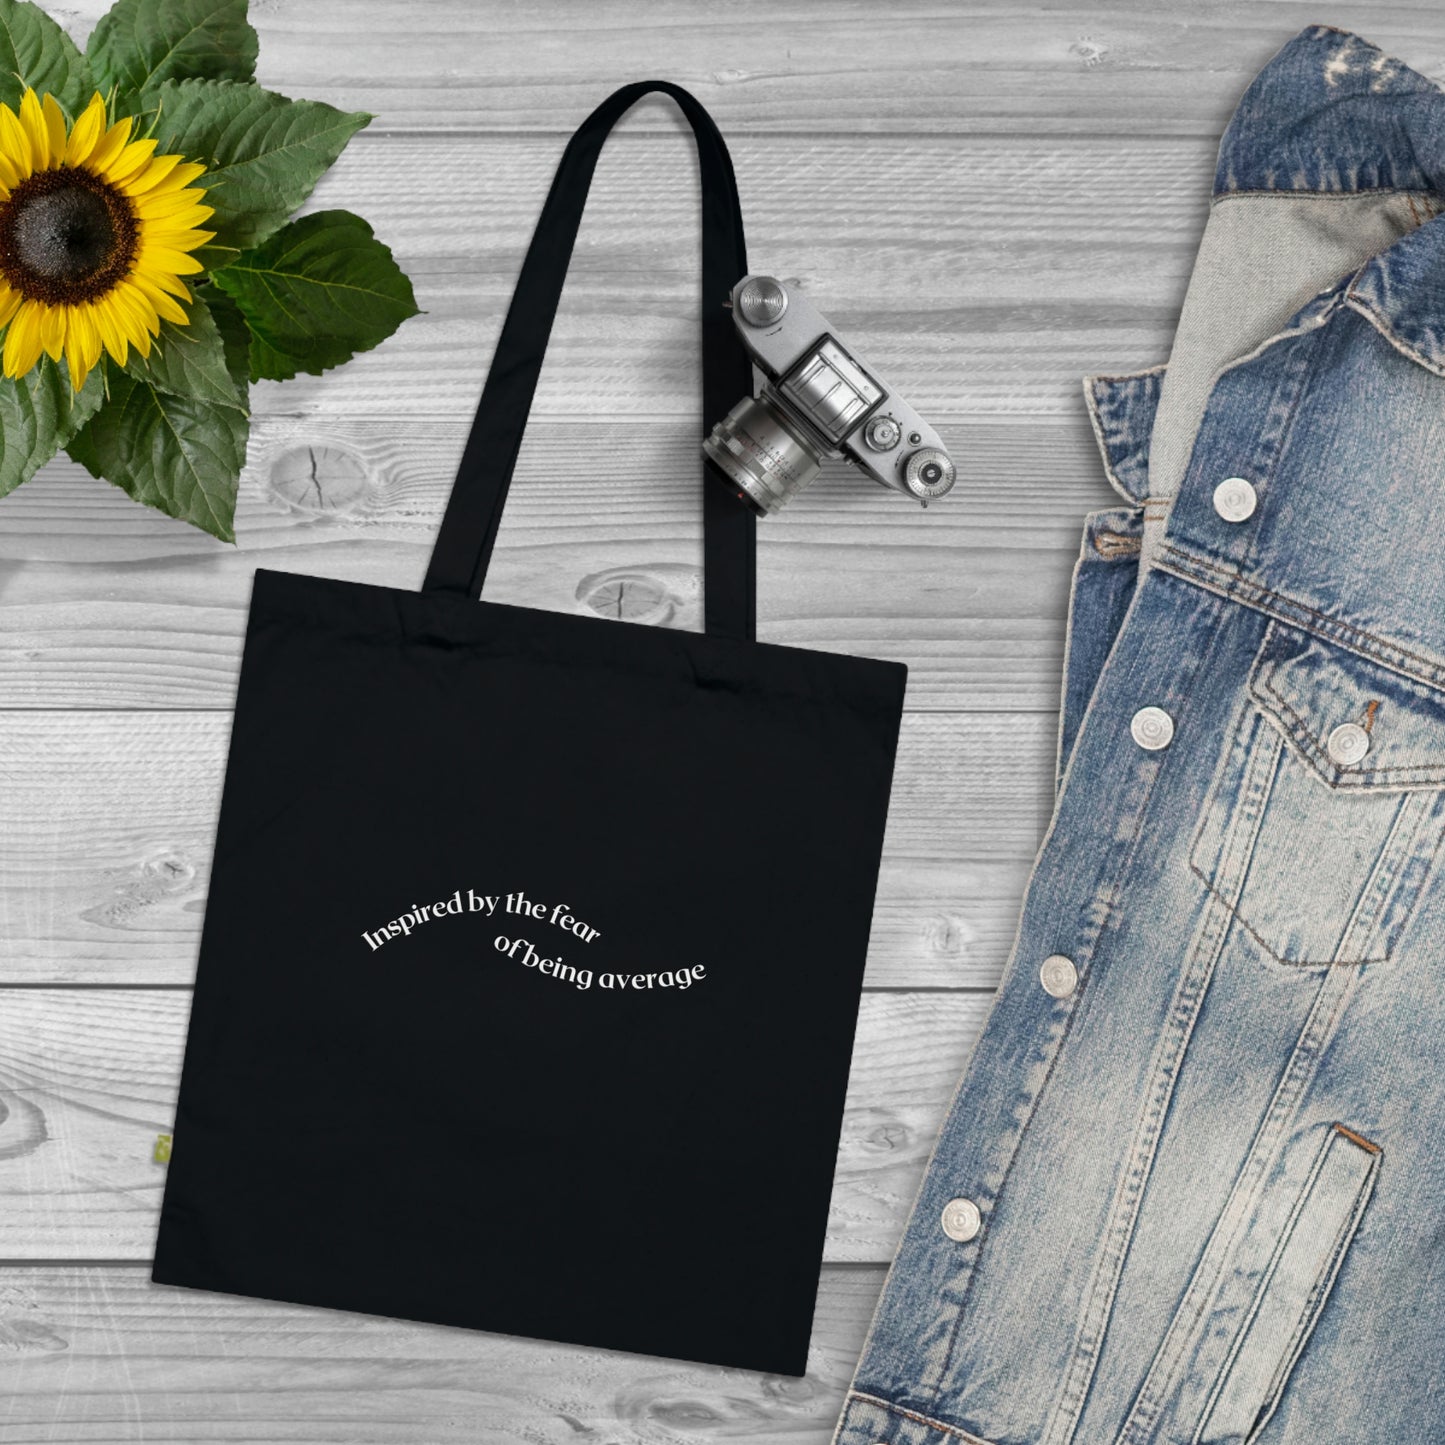 "Inspired by the fear of being average" Lumi Tote Bag